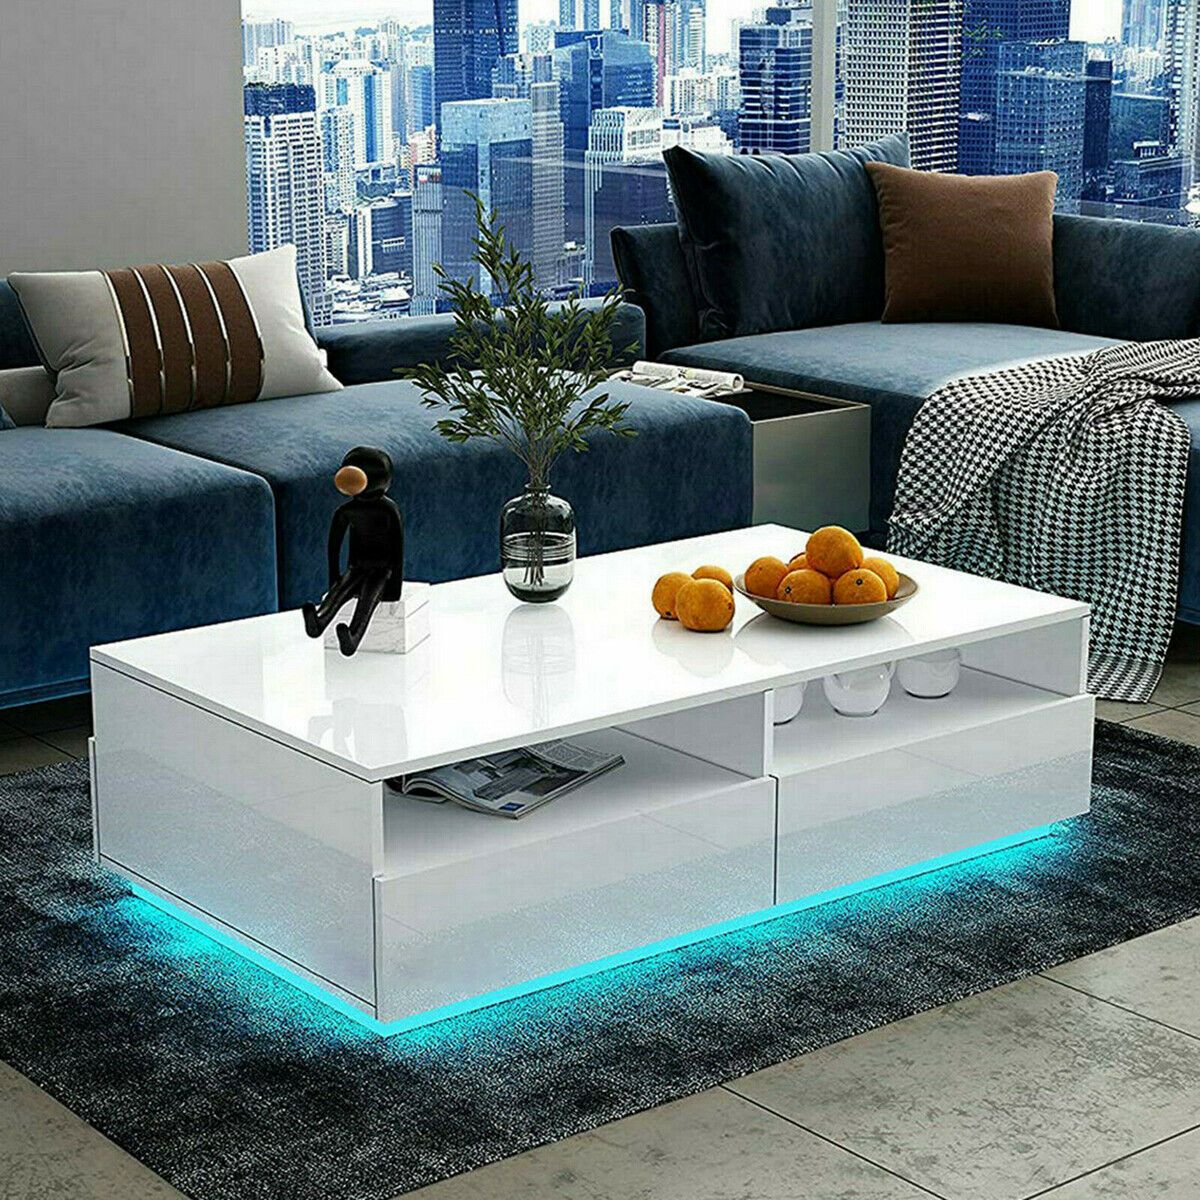 High Gloss 16 Colors Led Light Coffee Table W/ 4 Drawers Living Room Modern  | Ebay In Led Coffee Tables With 4 Drawers (Photo 5 of 15)